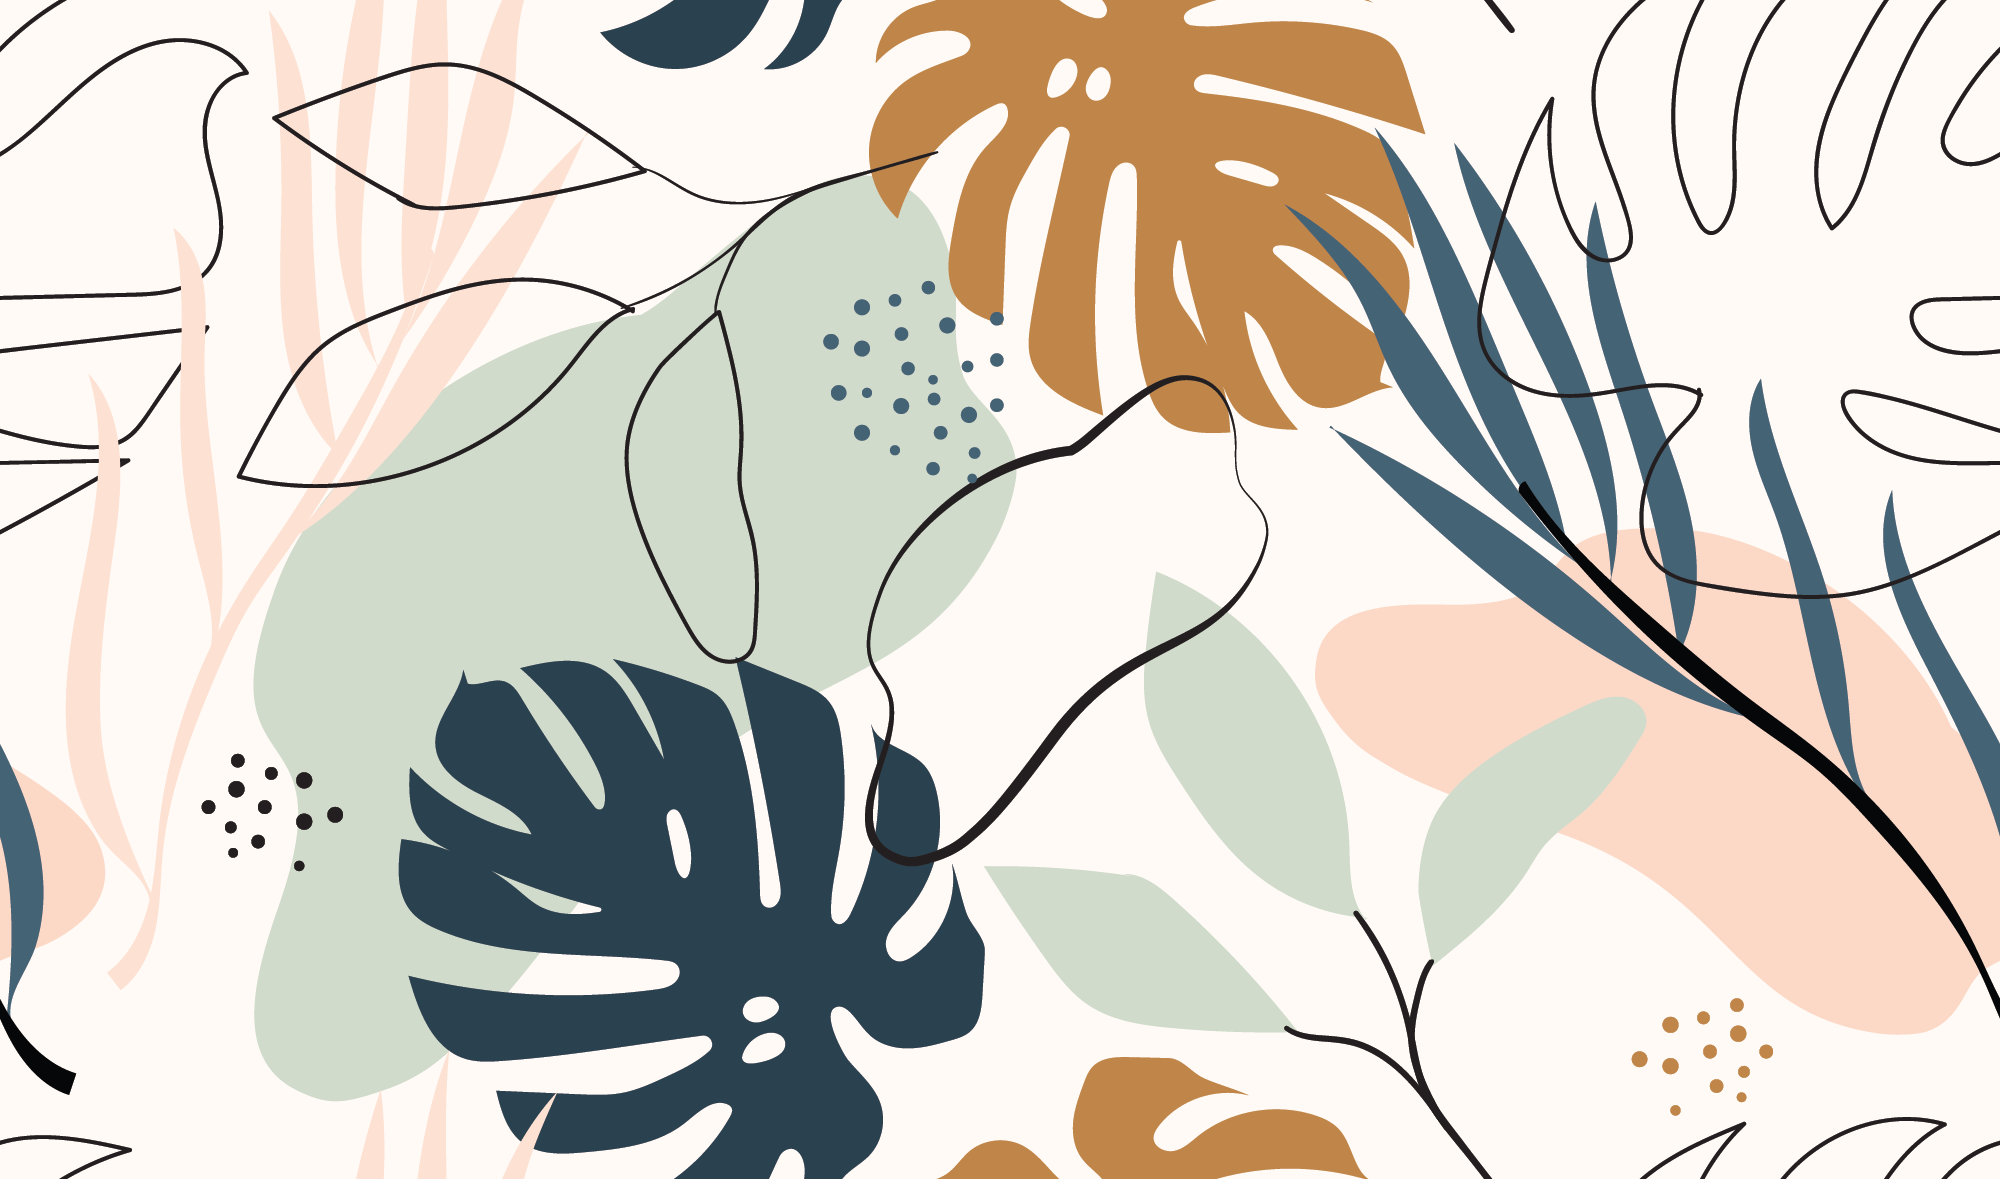 A colorful wallpaper with abstract shapes and leaves - Neutral